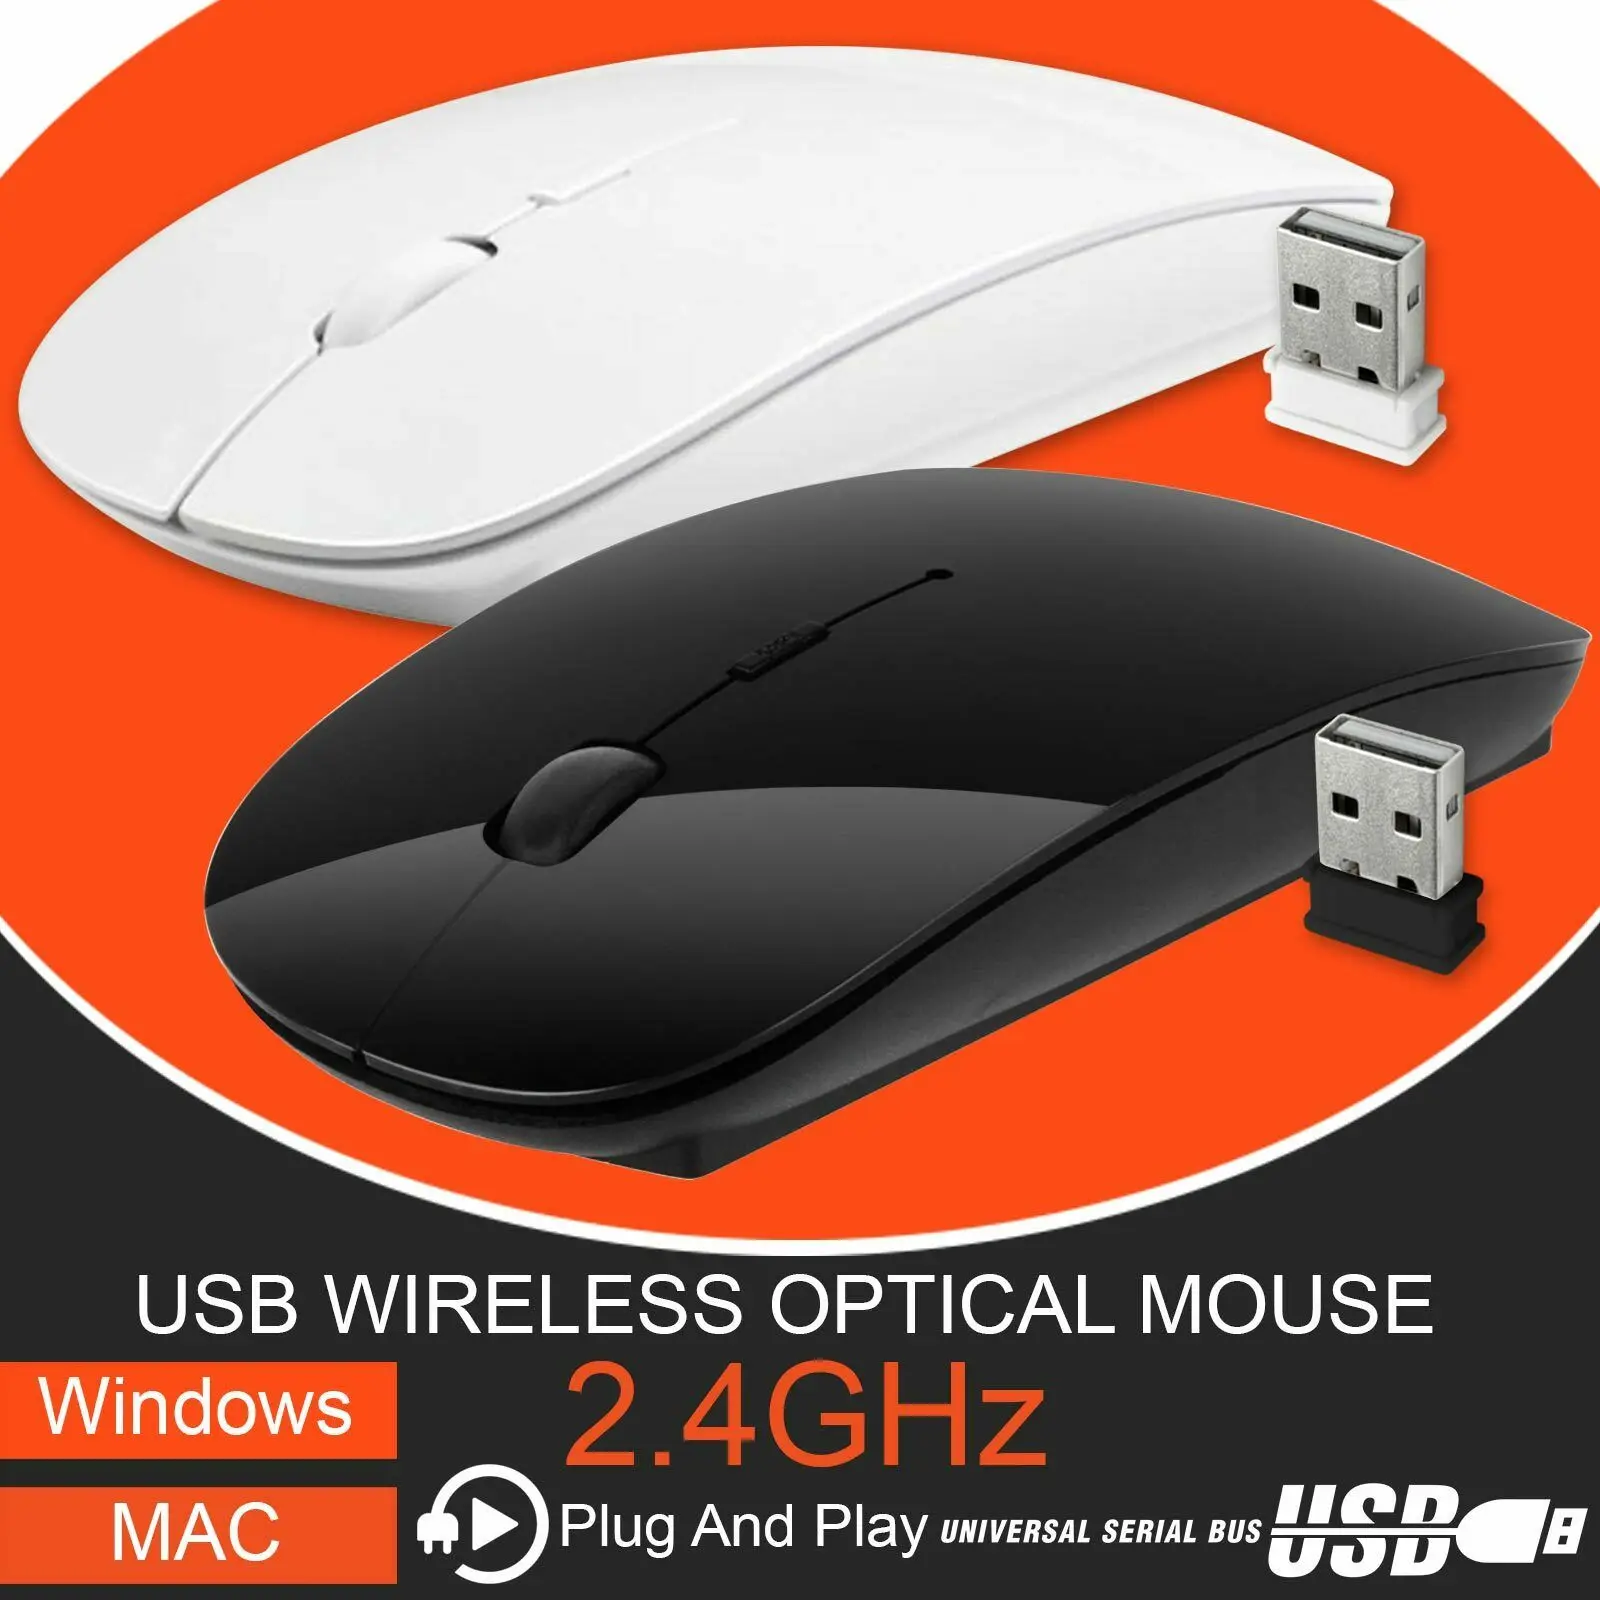 

2.4 GHz Wireless Cordless Mouse Mice Optical Scroll For PC Laptop Computer + USB